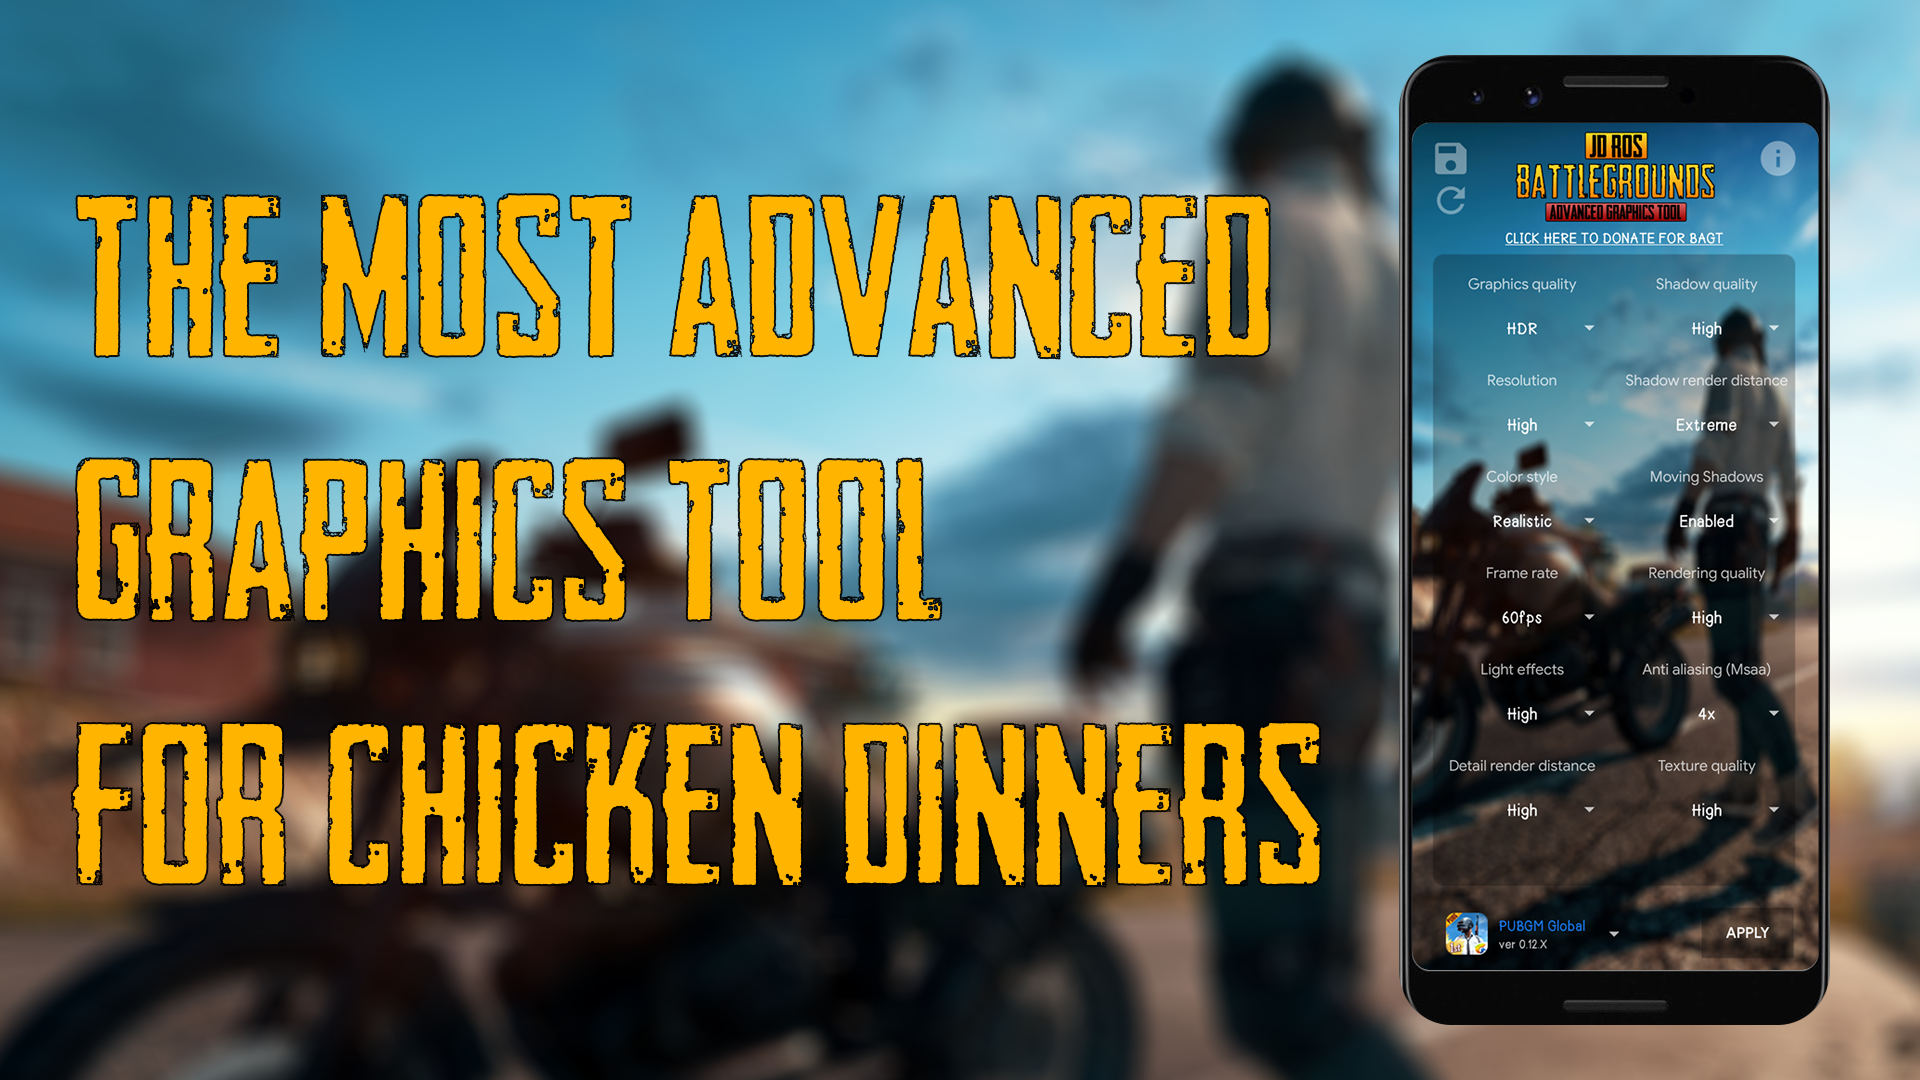 Battlegrounds Advanced Graphics Tool [NO BAN] for Android ... - 